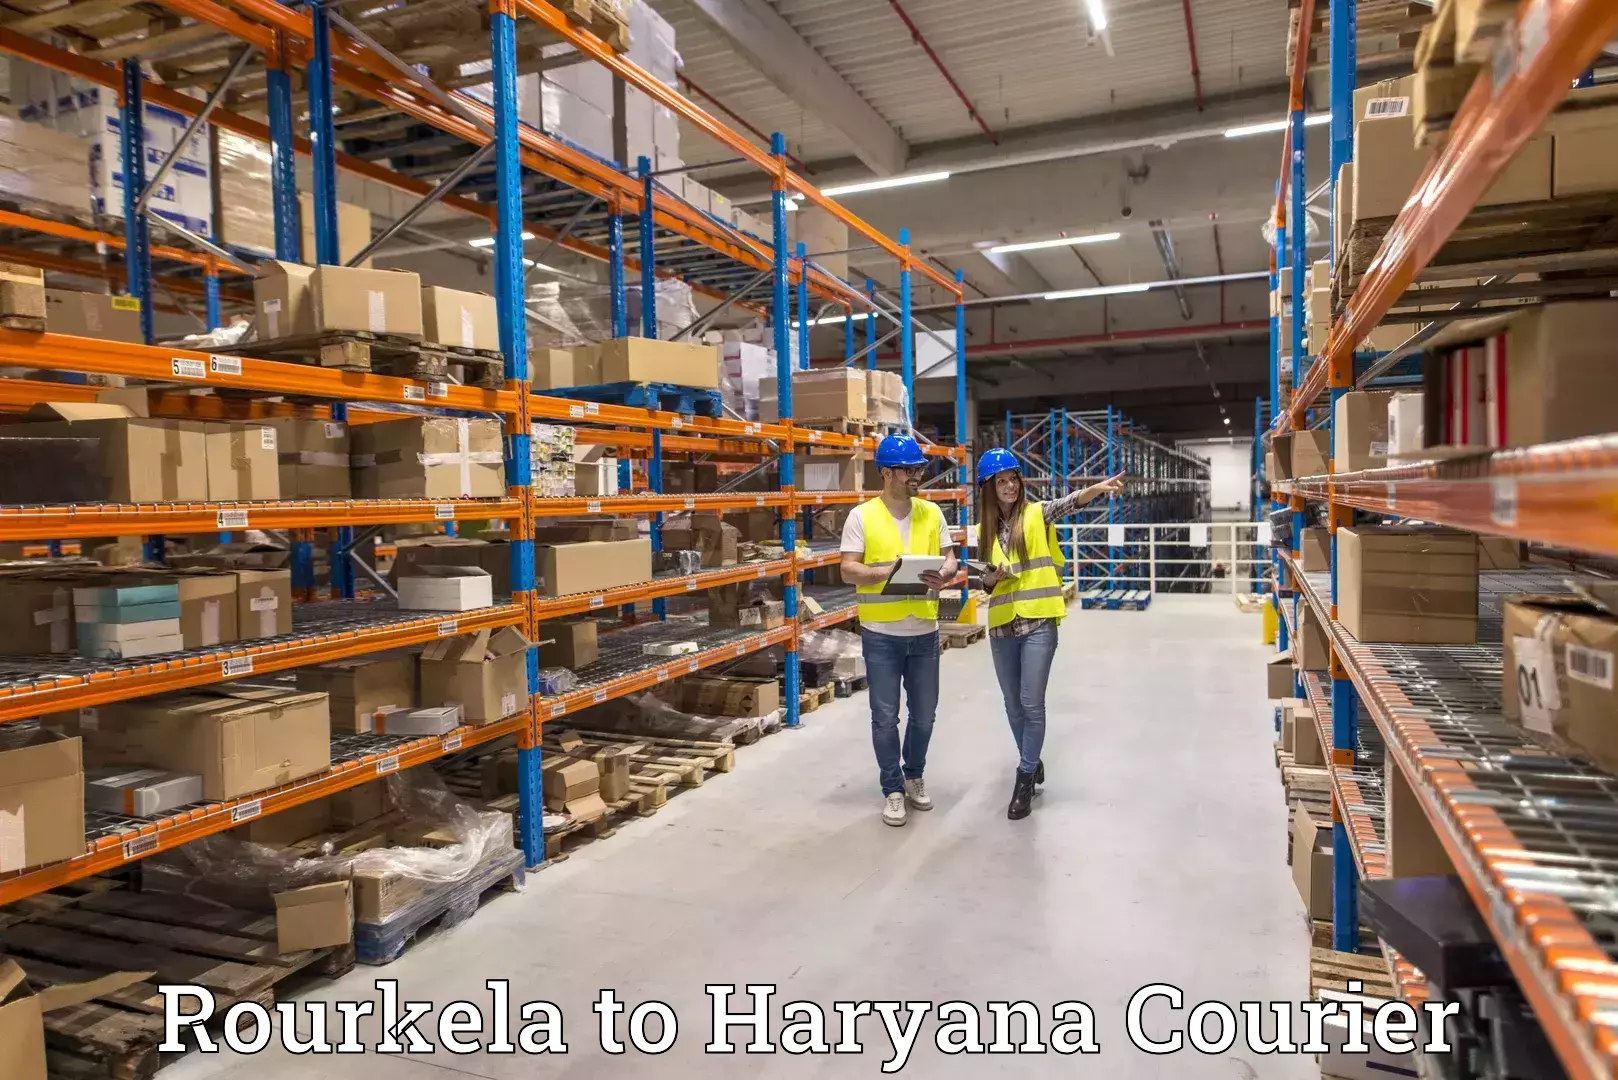 Subscription-based courier Rourkela to Siwani